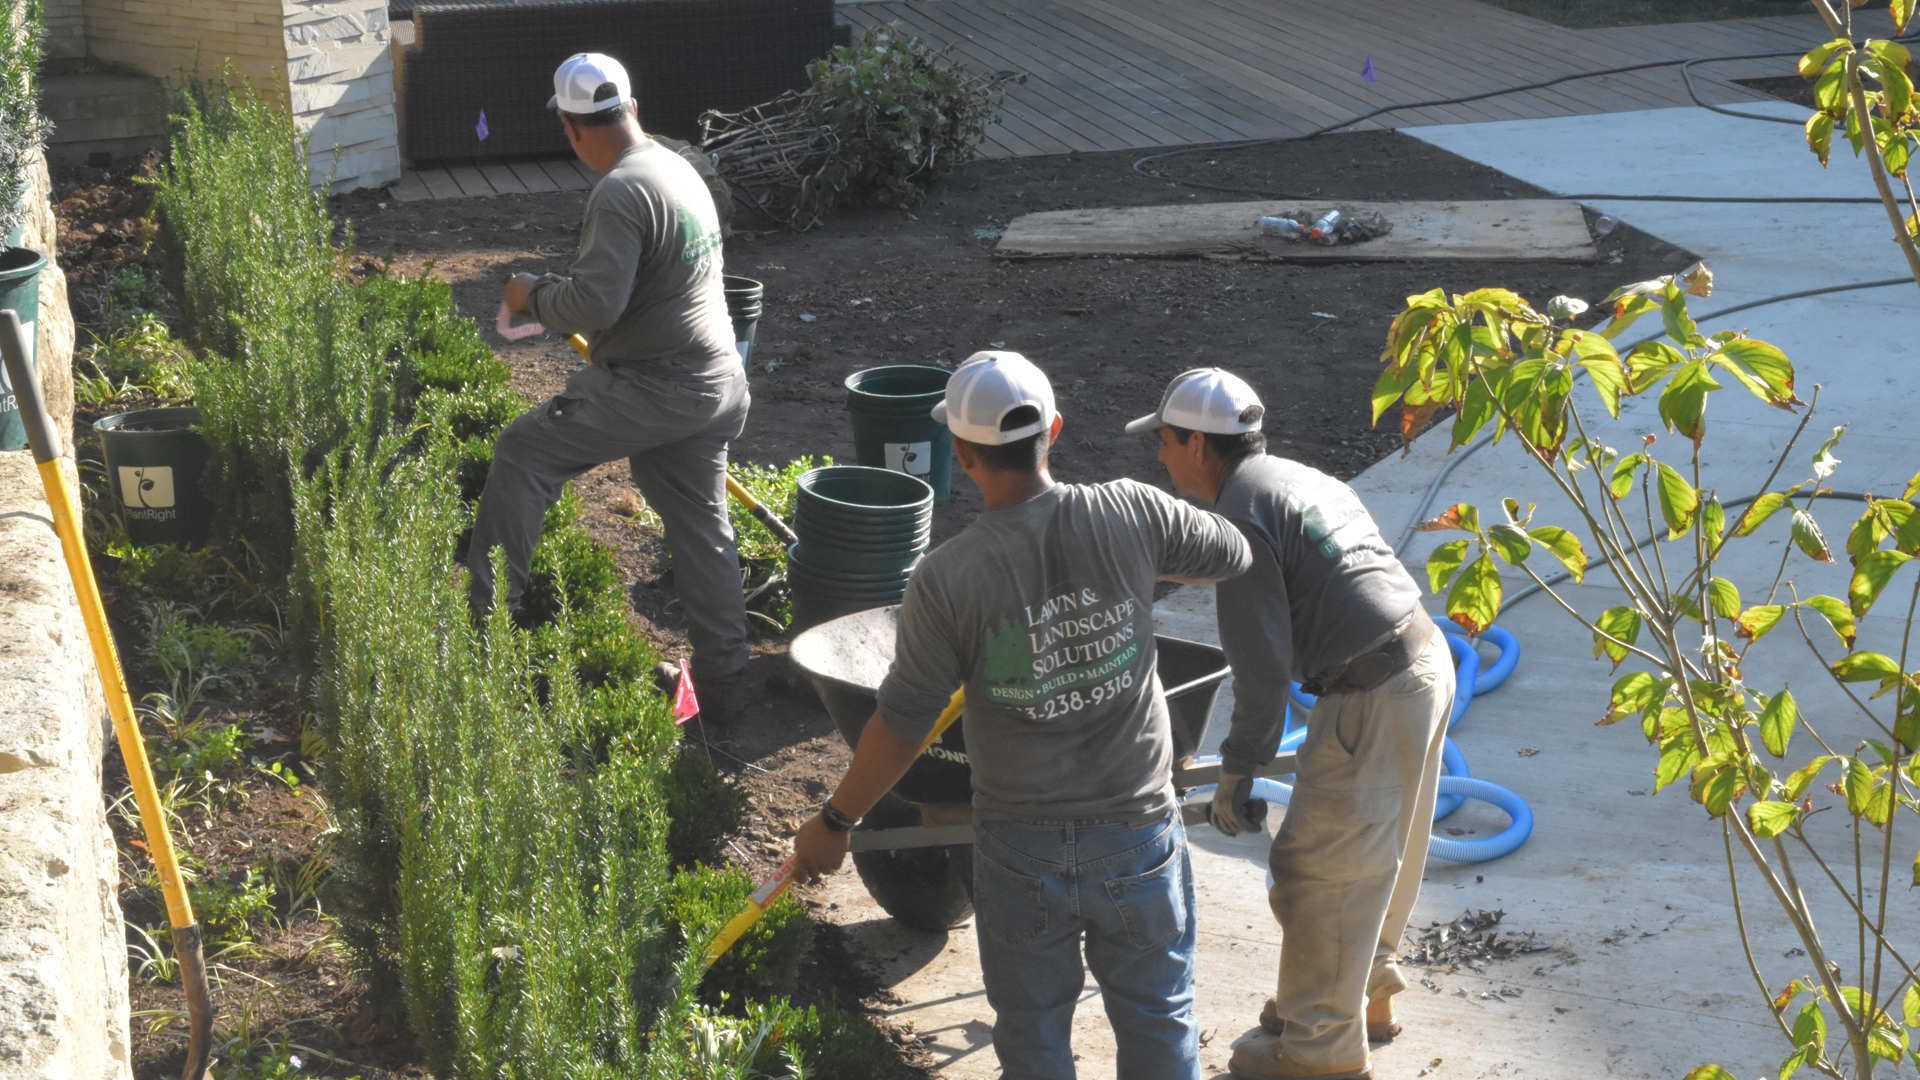 Landscaping experts at work in the Overland Park, KS area.